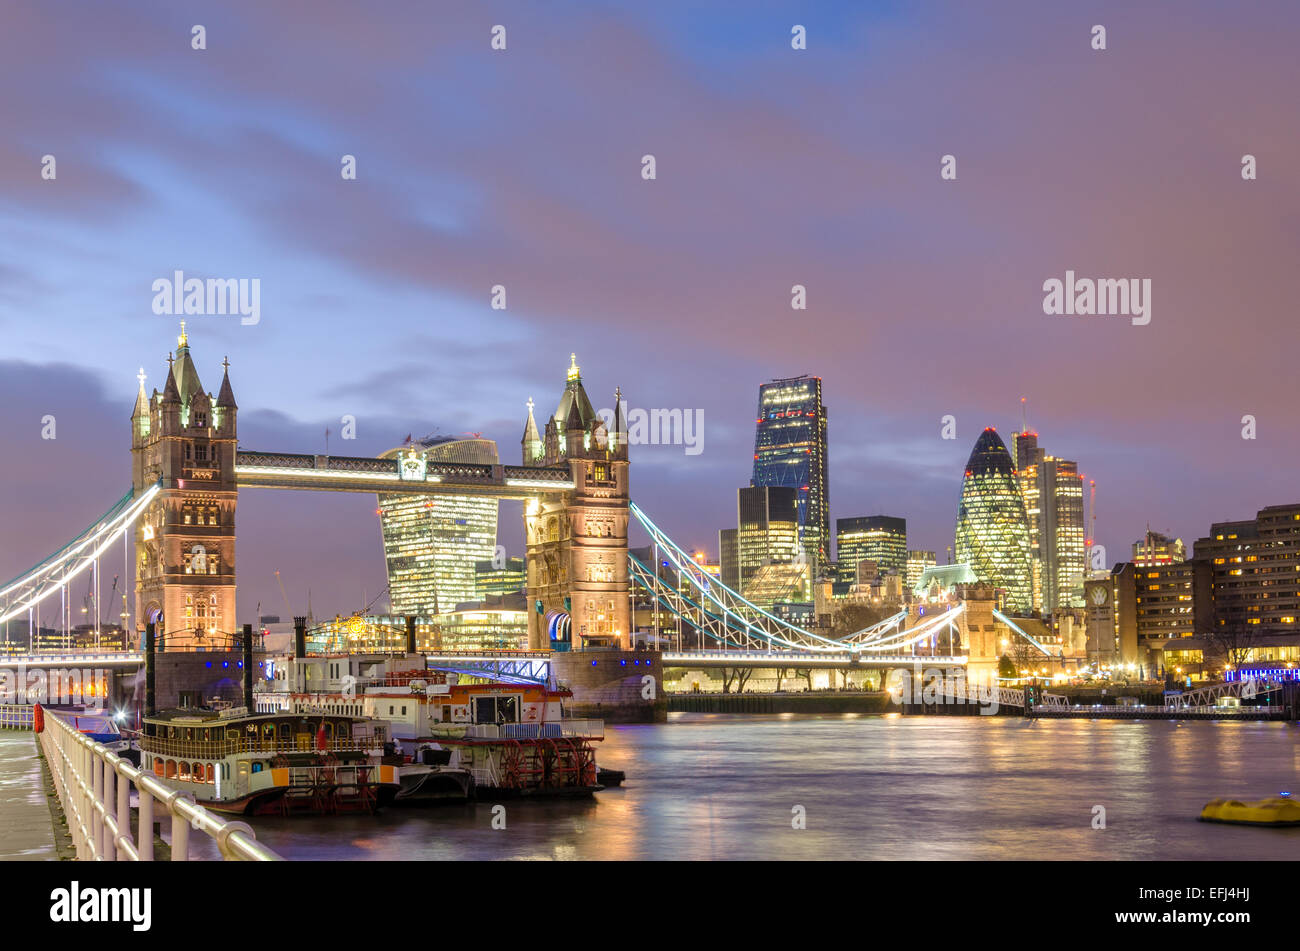 London Southbank at night showing an iconic London skyline including Tower Bridge and the City of London Stock Photo